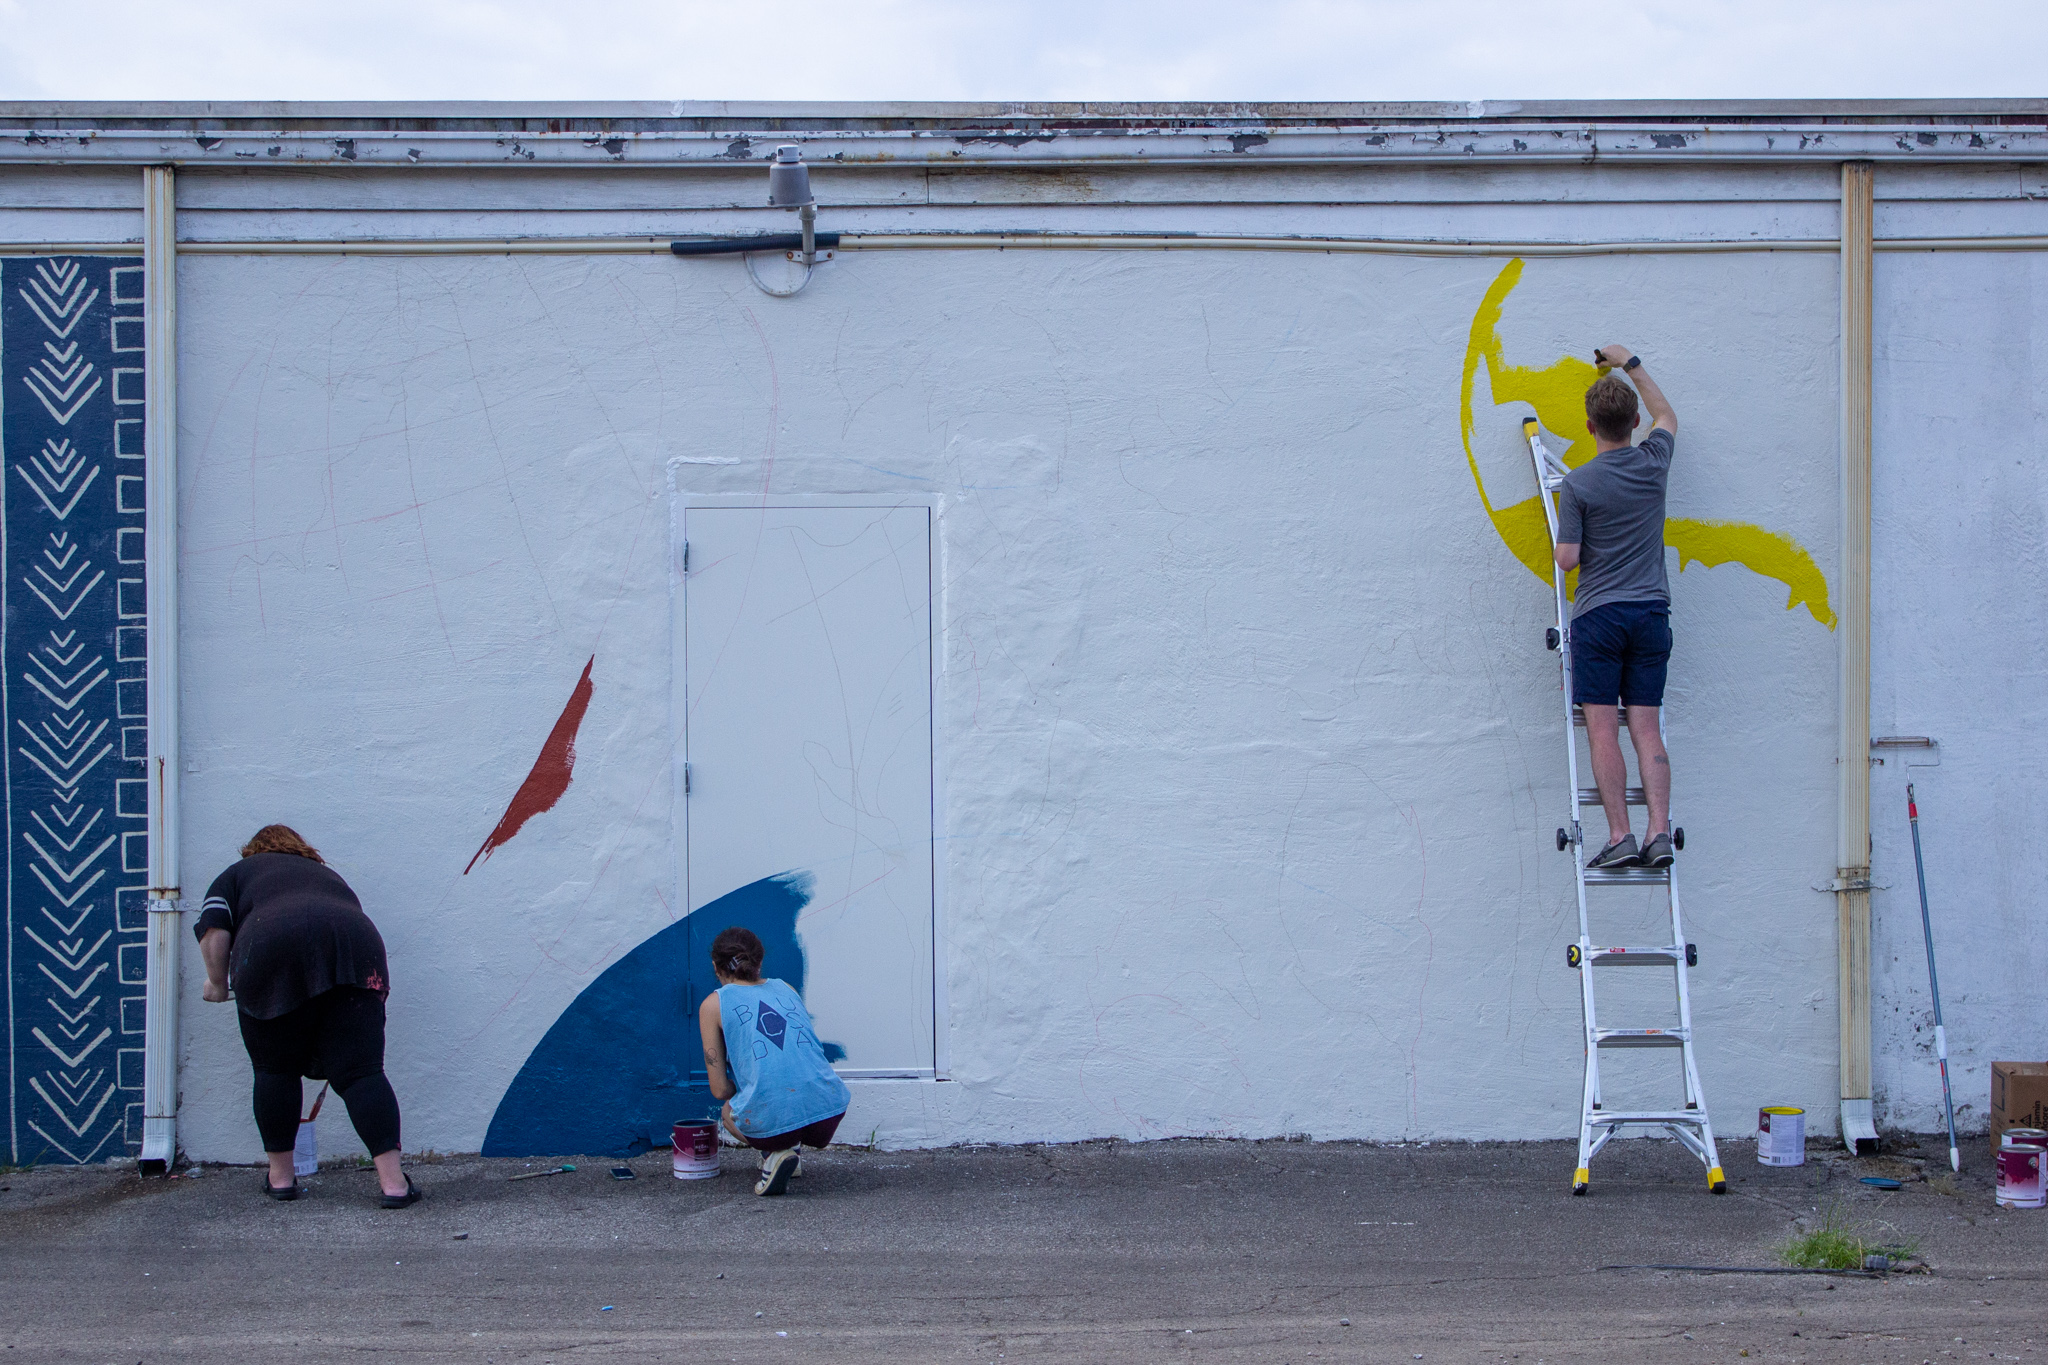 New mural alert! Photo by Libby Foster fot Bham Now.